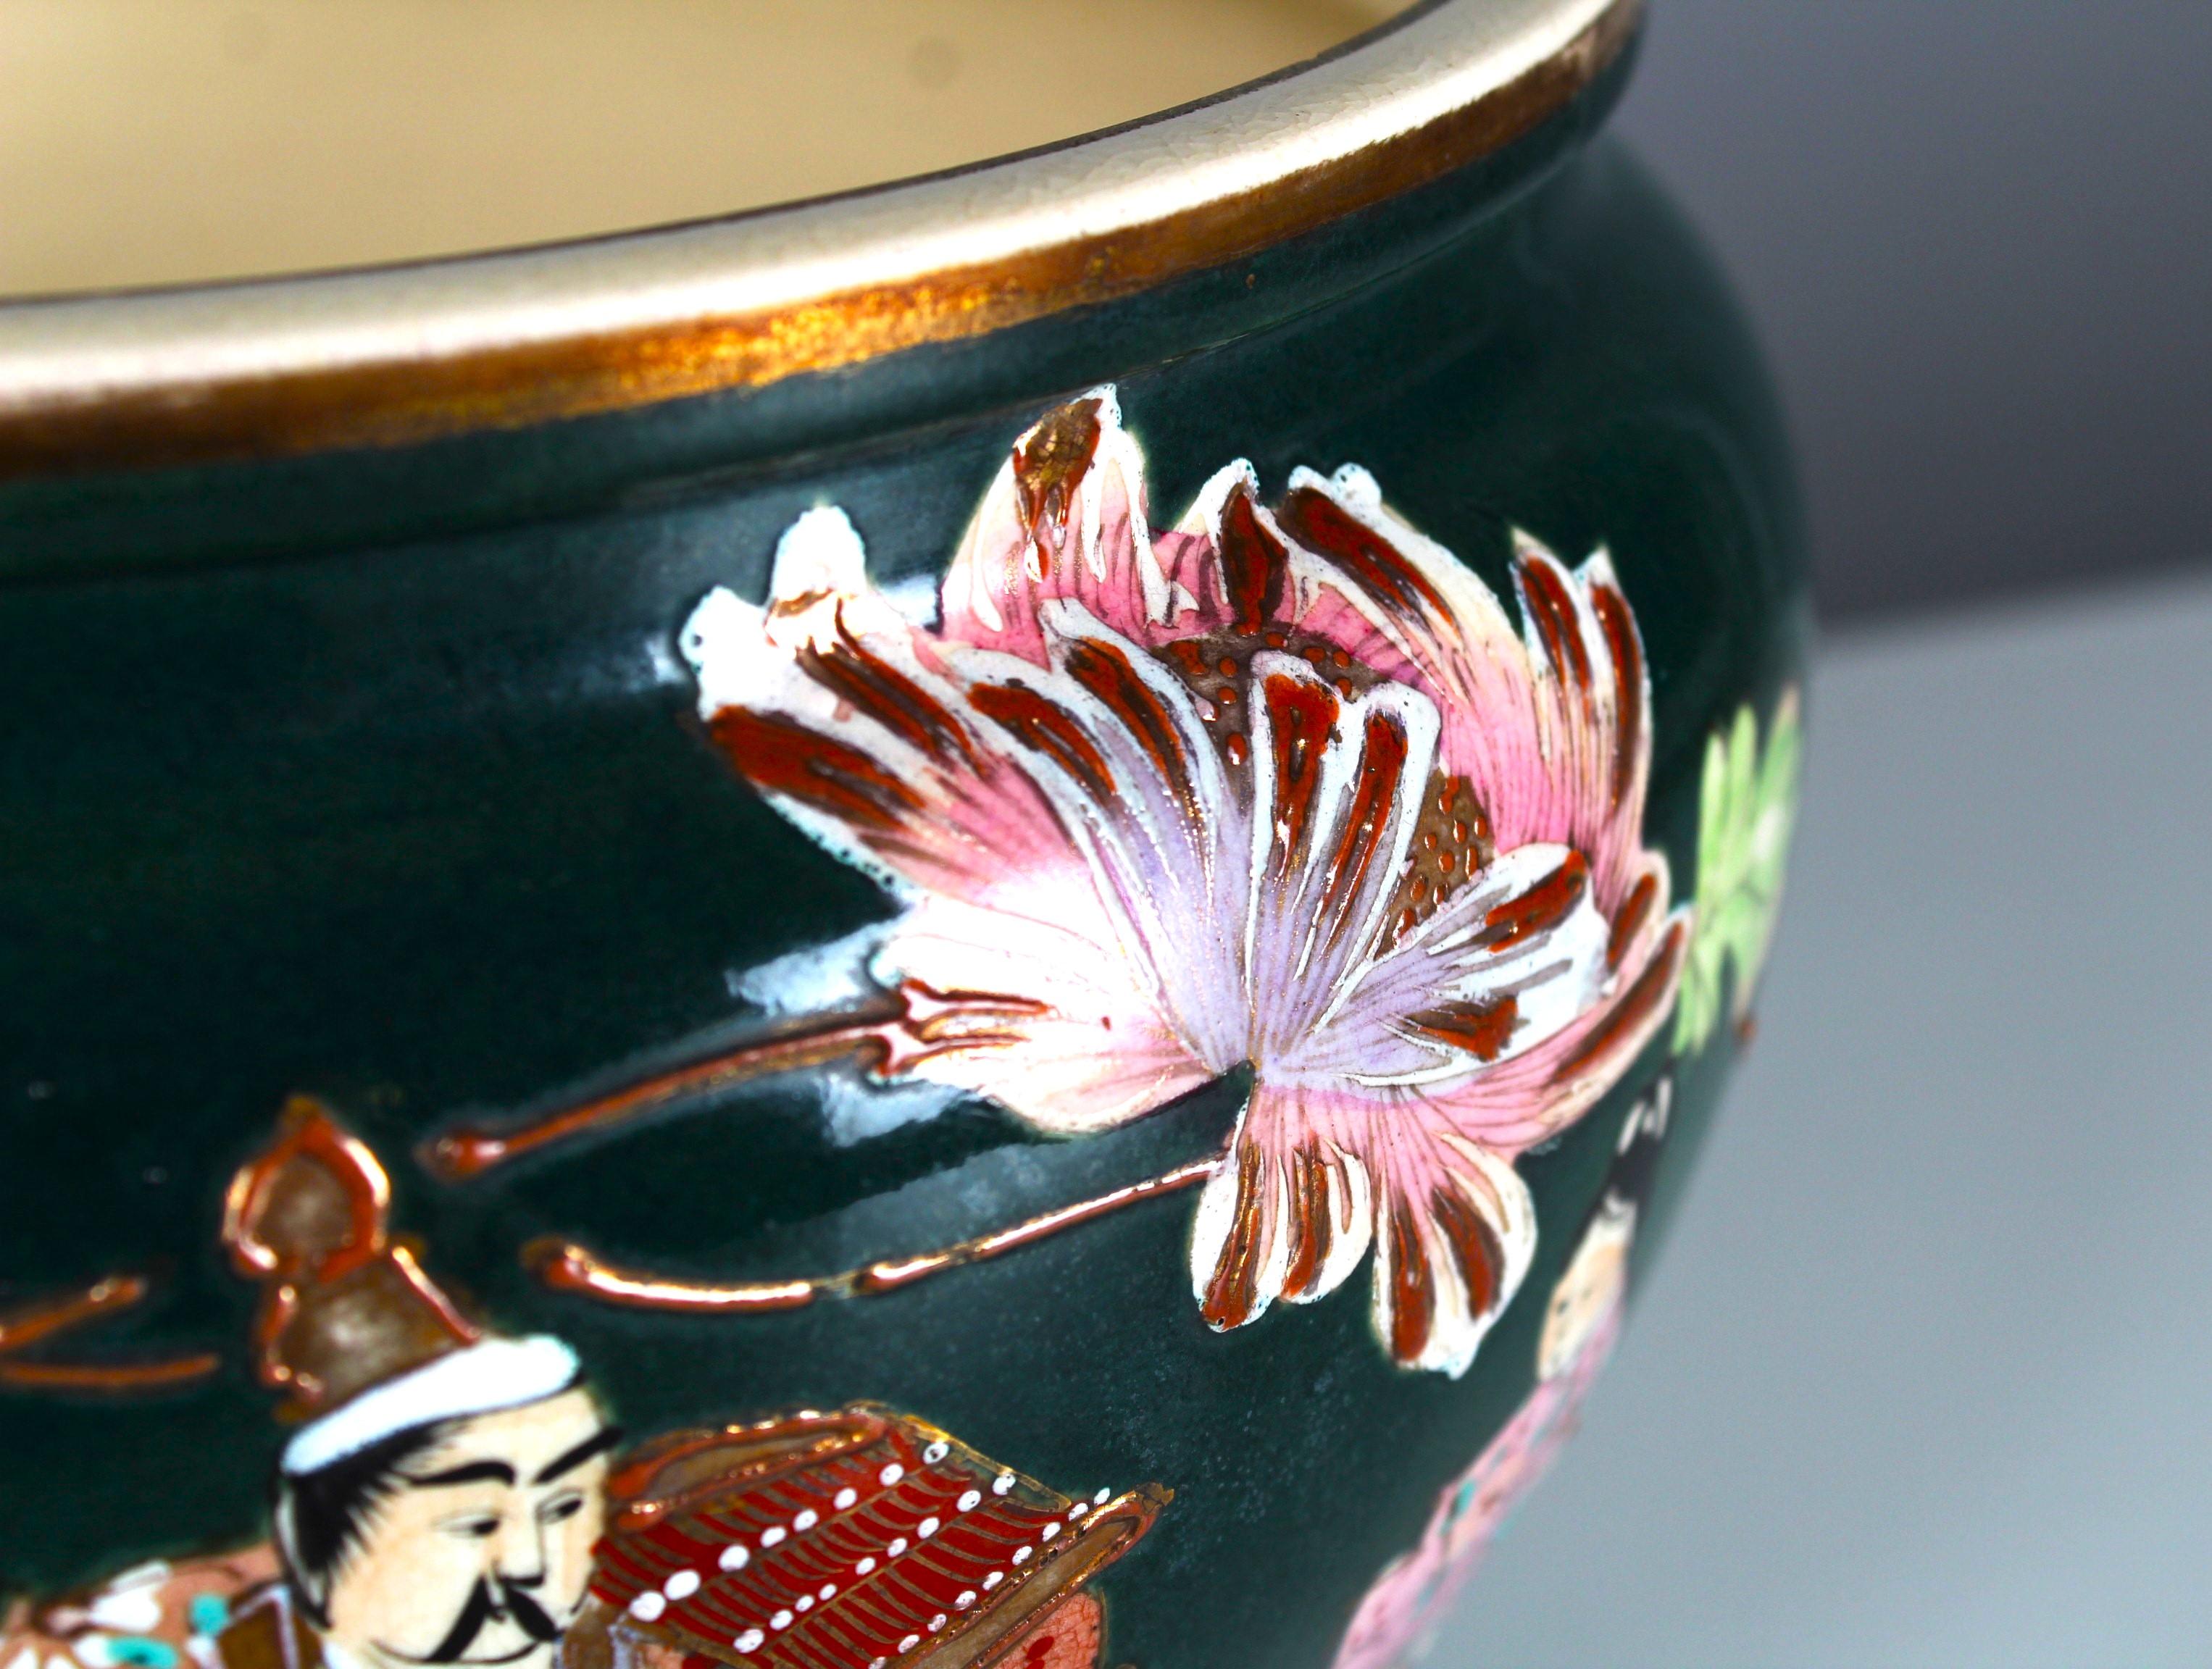 Exceptional hand-painted flower pot with a Chinese look, France 1880s.
Signed at the bottom by the artist 